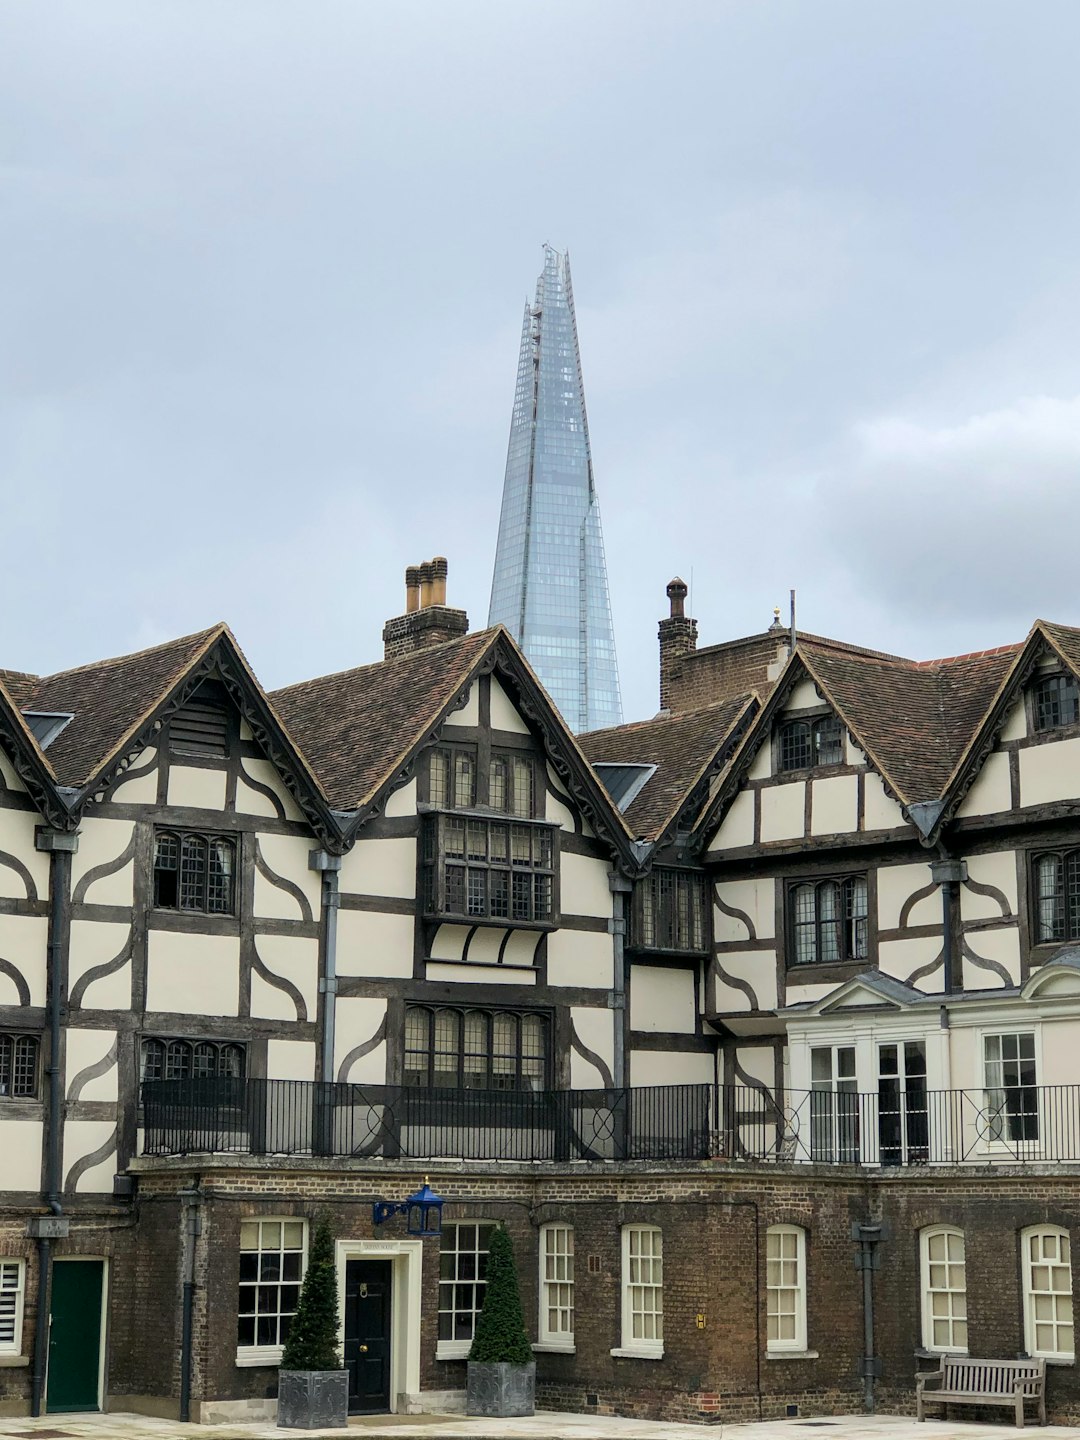 Town photo spot Tower of London The Shard